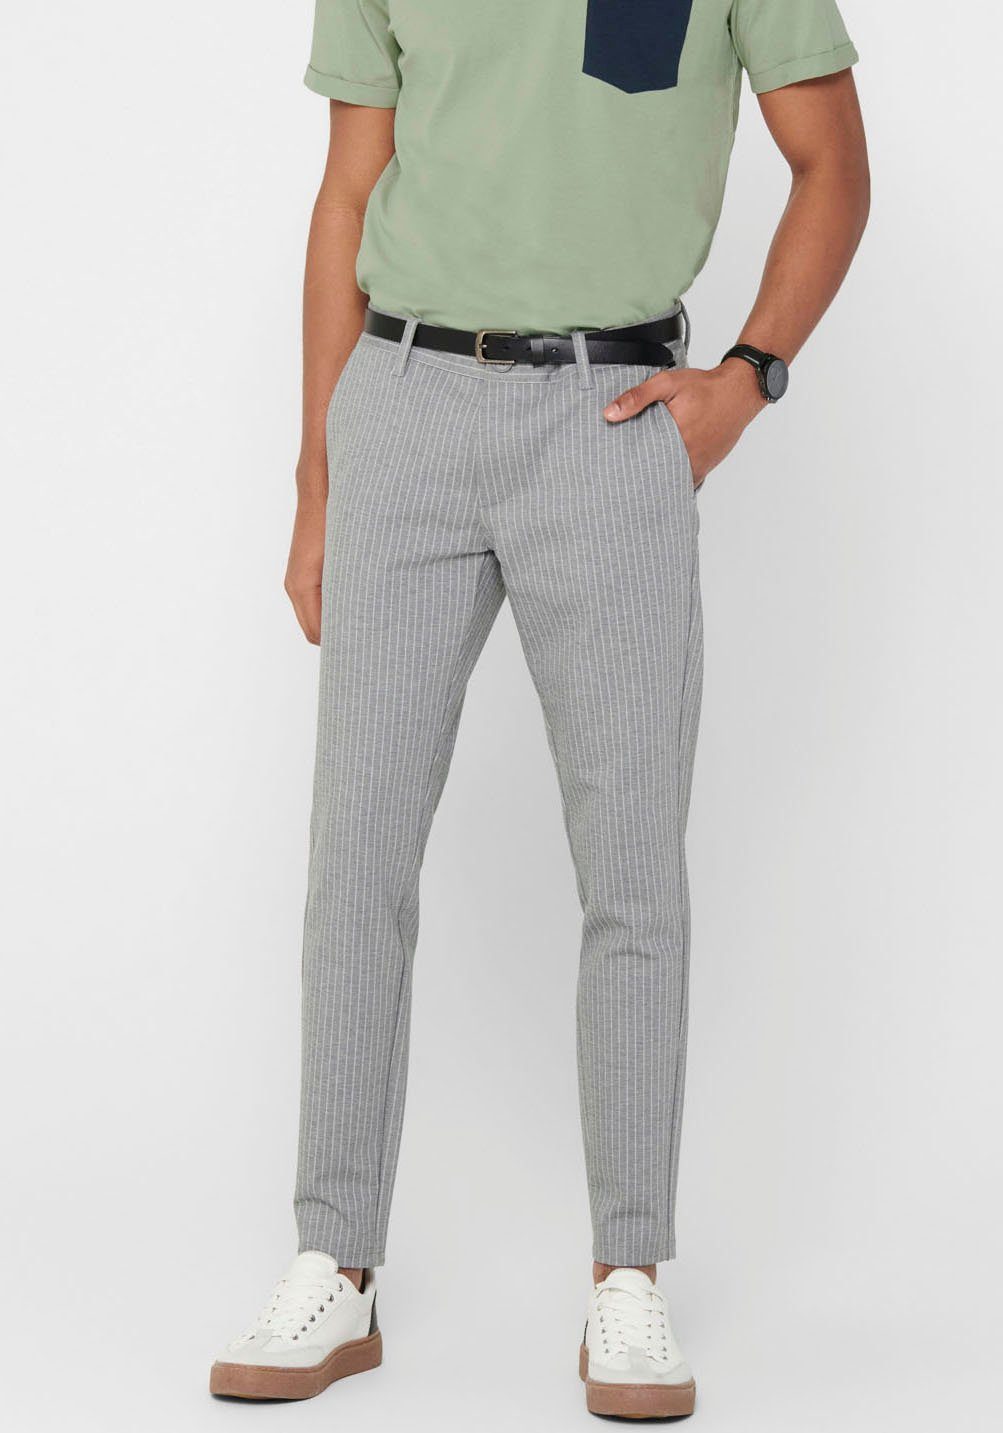 & Chinohose PANT MARK light-grey-melange ONLY SONS